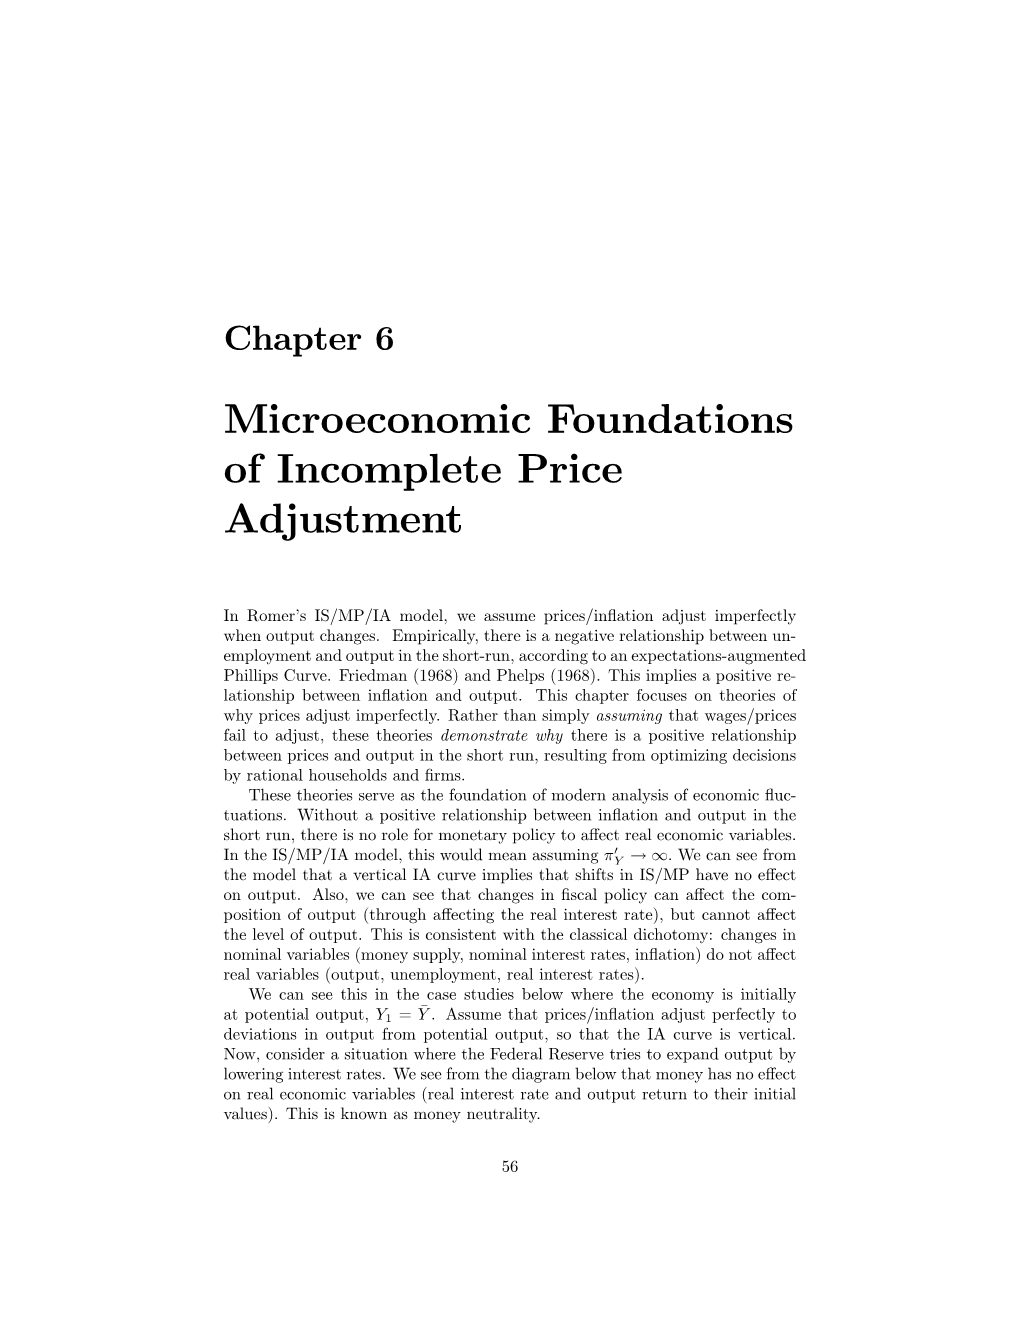 Microeconomic Foundations of Incomplete Price Adjustment